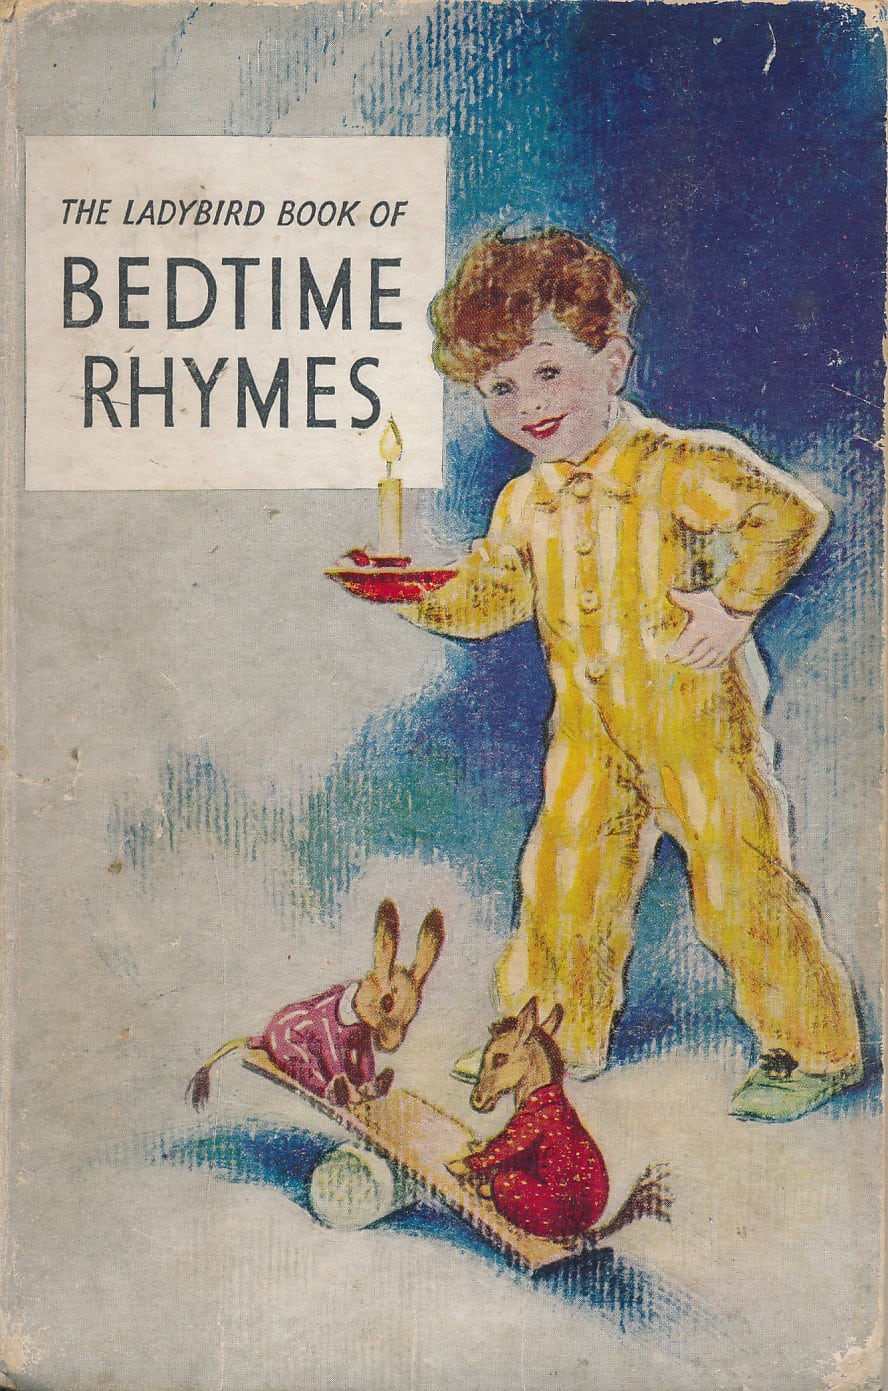 The Ladybird Book Of Bedtime Stories Geoffrey Lapage, Illustrations George Brook (Wills & Hepworth Ltd., Loughborough UK, 9th edition 1950)